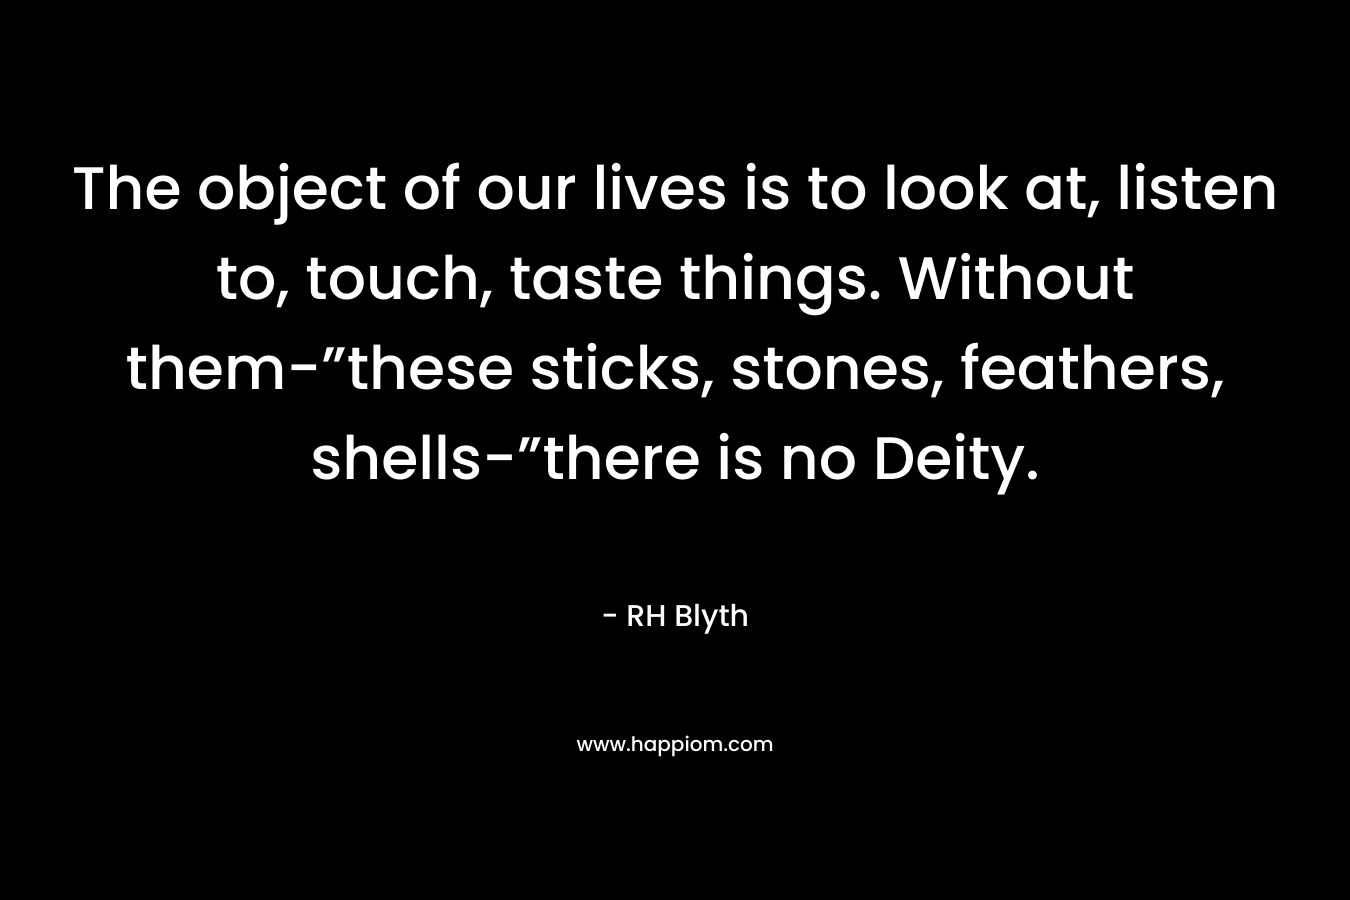 The object of our lives is to look at, listen to, touch, taste things. Without them-”these sticks, stones, feathers, shells-”there is no Deity. – RH Blyth